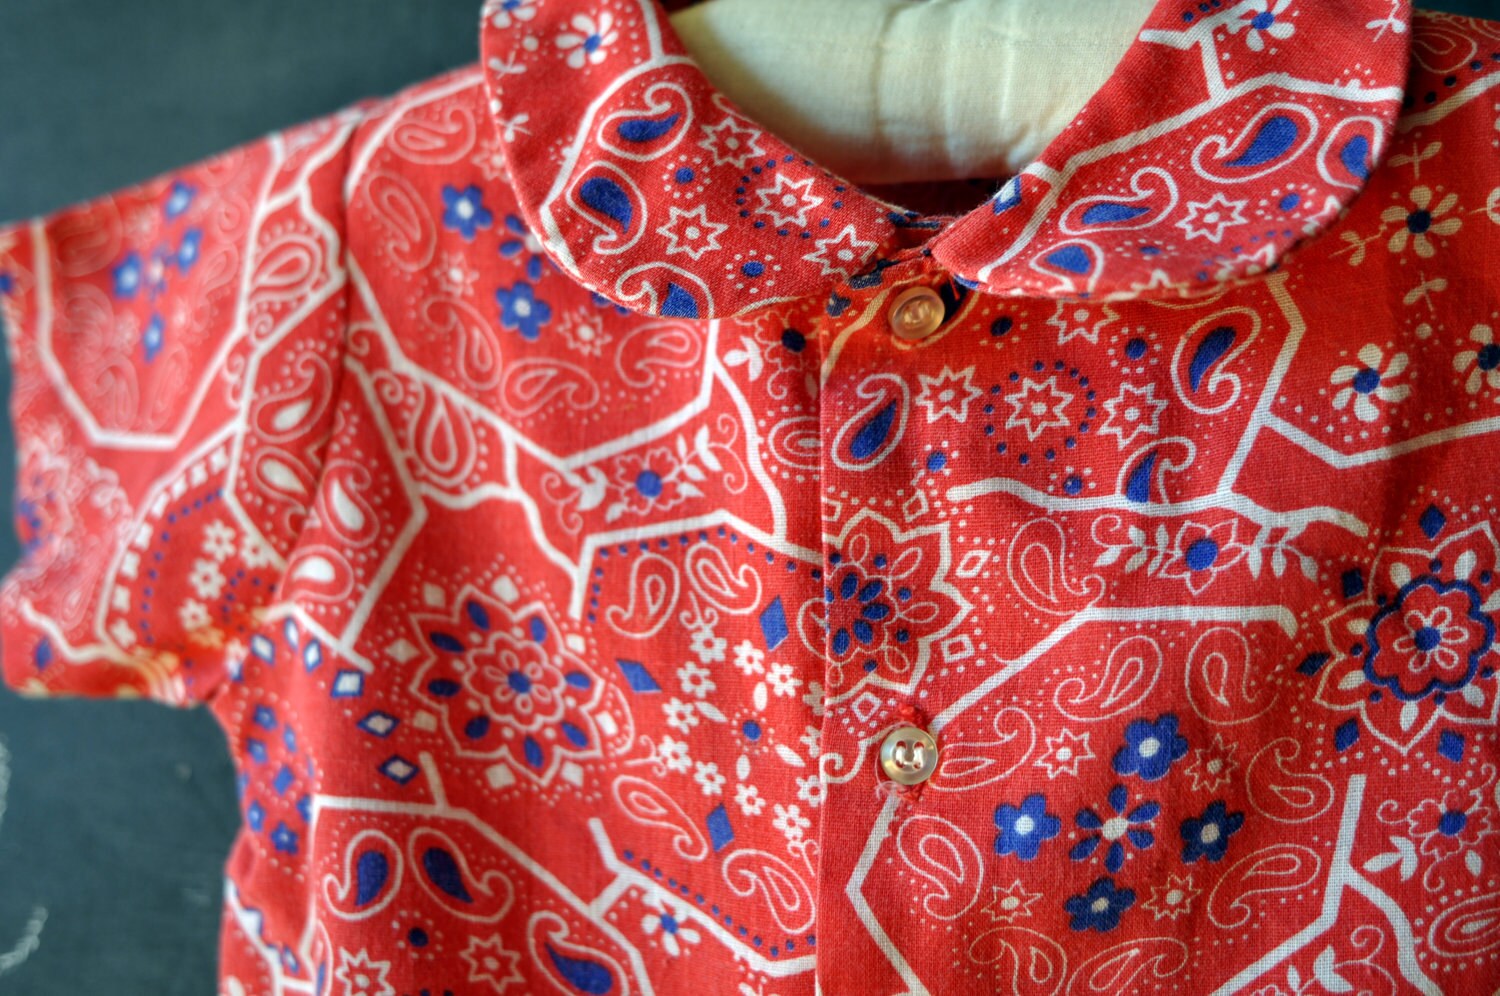 Baby vintage red handkerchief button up shirt